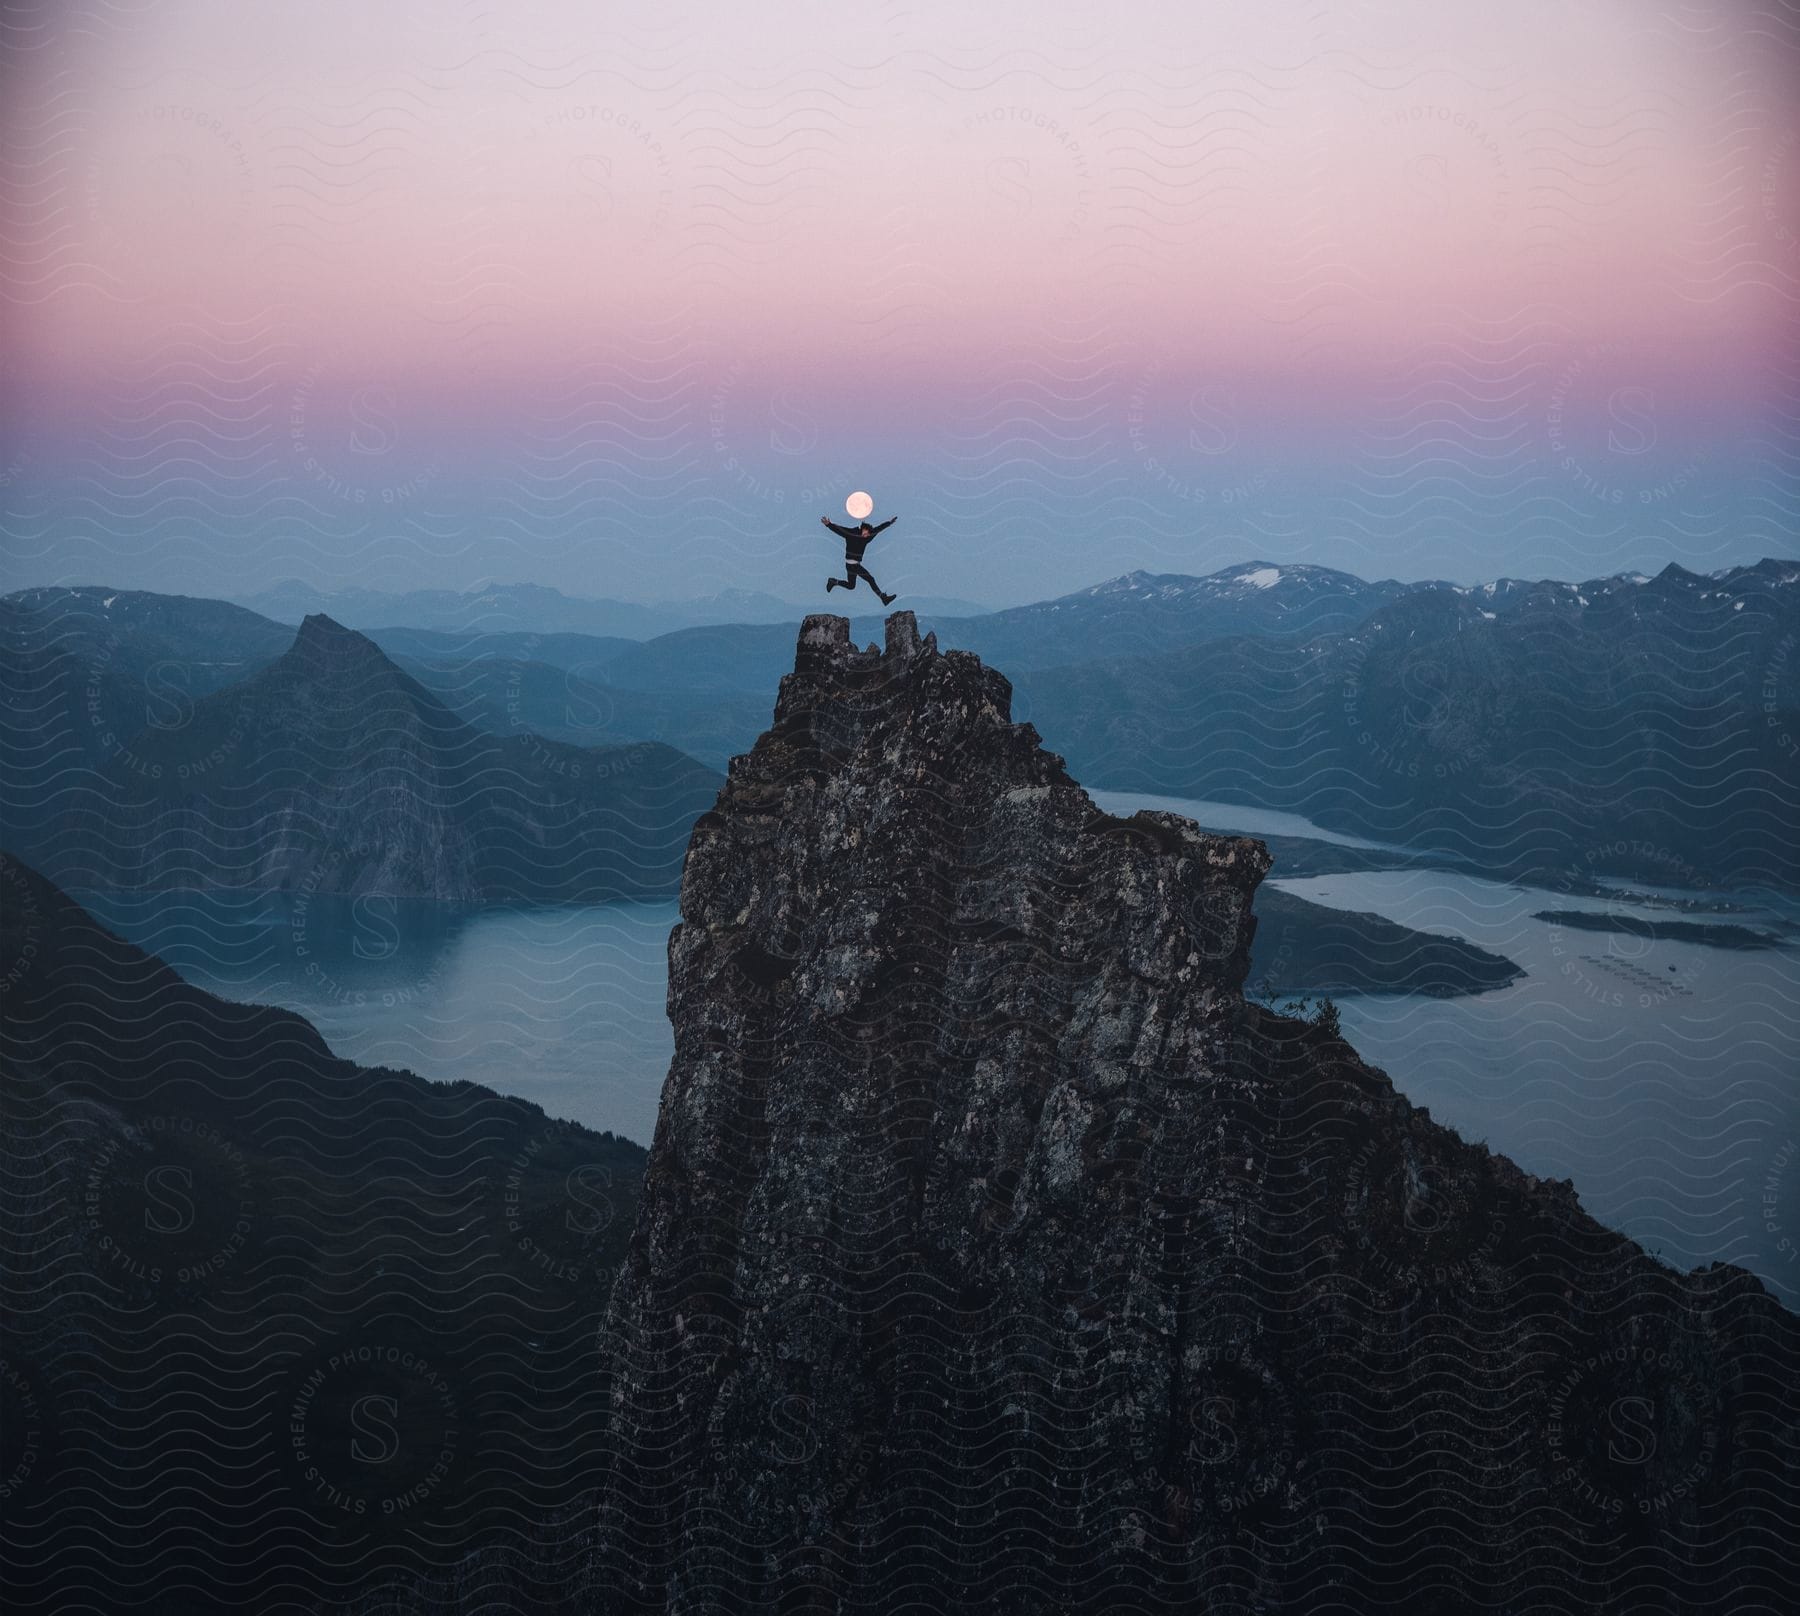 A person is jumping on top of a cliff outdoors